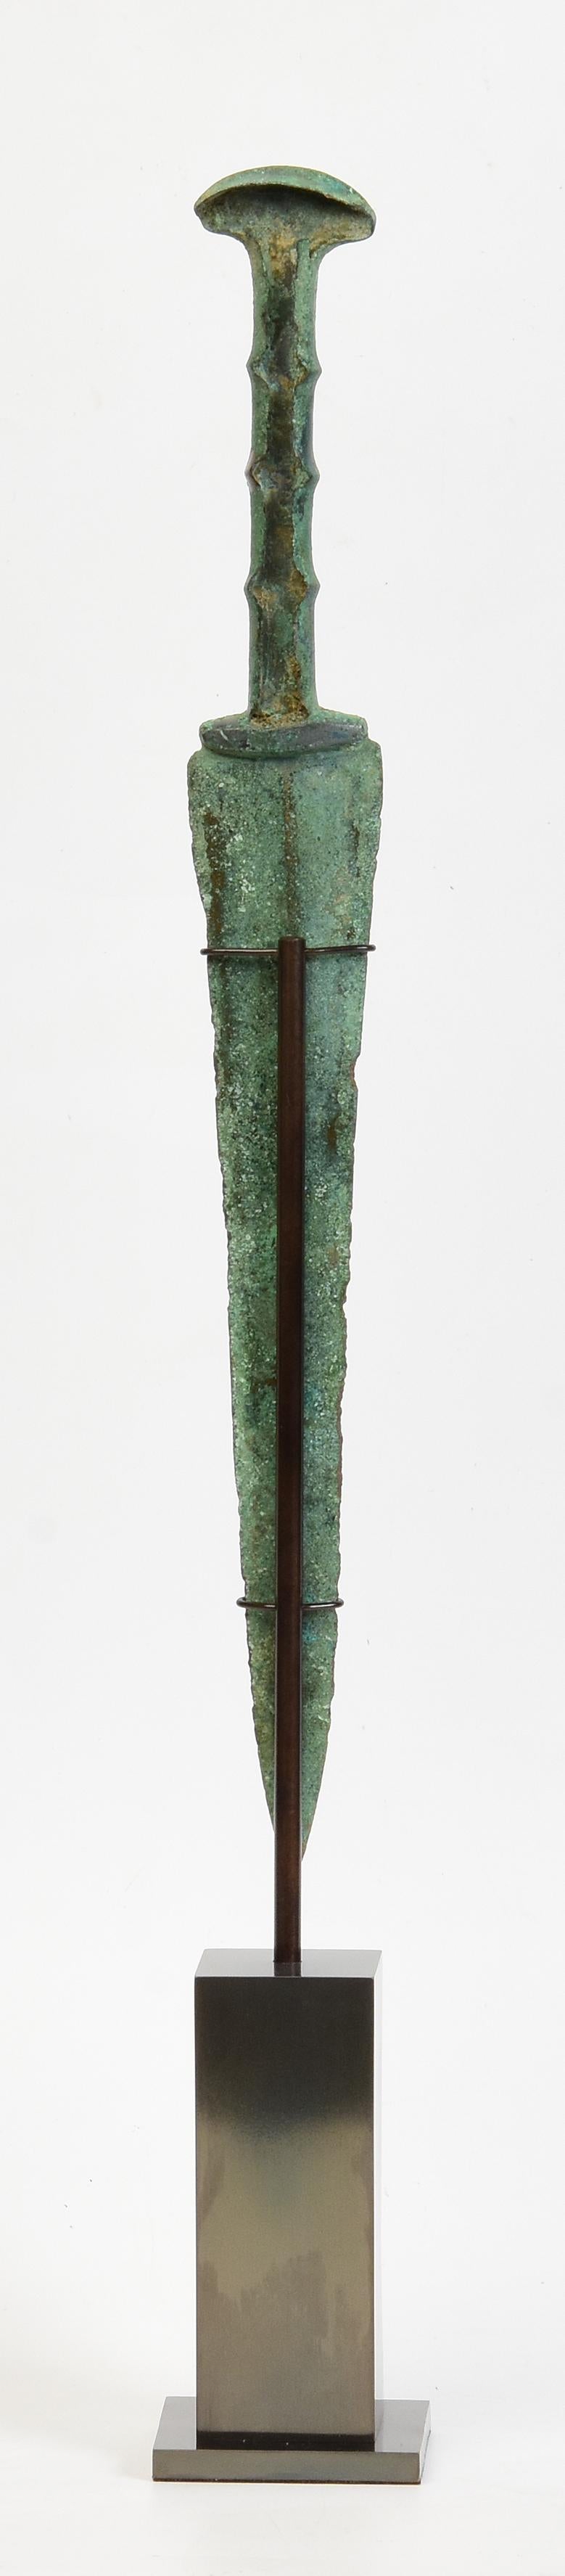 Ancient Antique Luristan Bronze Short Sword / Knife / Early Iron Age Weapon For Sale 3